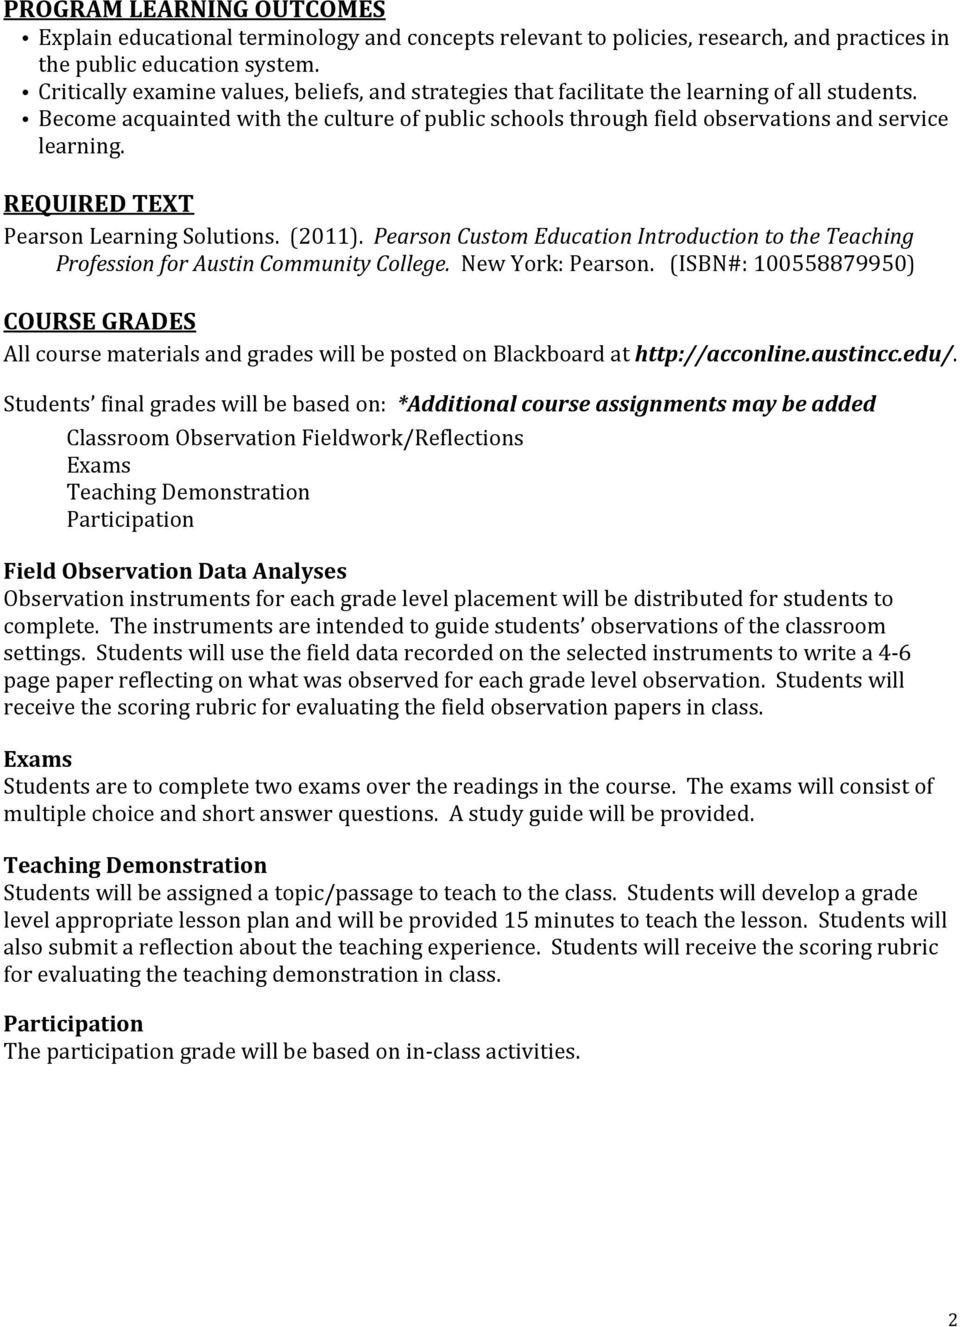 REQUIRED TEXT Pearson Learning Solutions. (2011). Pearson Custom Education Introduction to the Teaching Profession for Austin Community College. New York: Pearson.